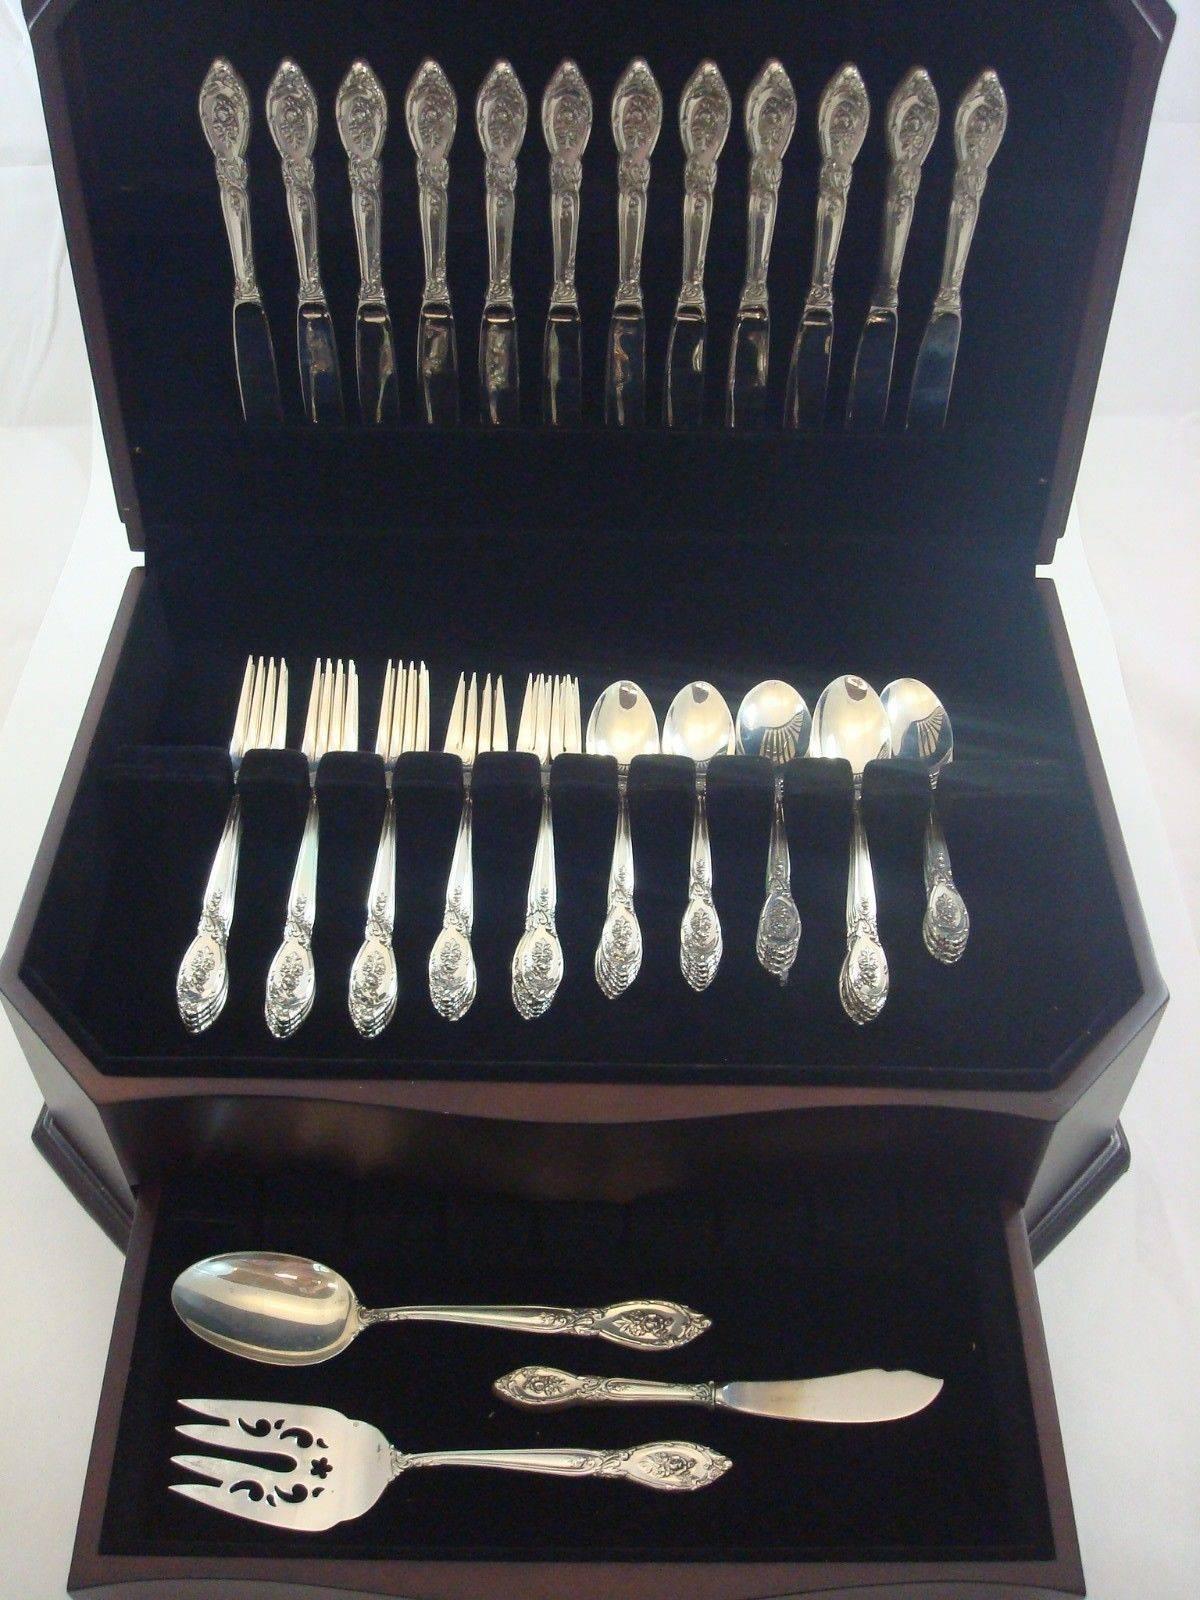 Beautiful rose elegance by Lunt sterling silver flatware set of 63 pieces. This set includes:

12 knives, 9